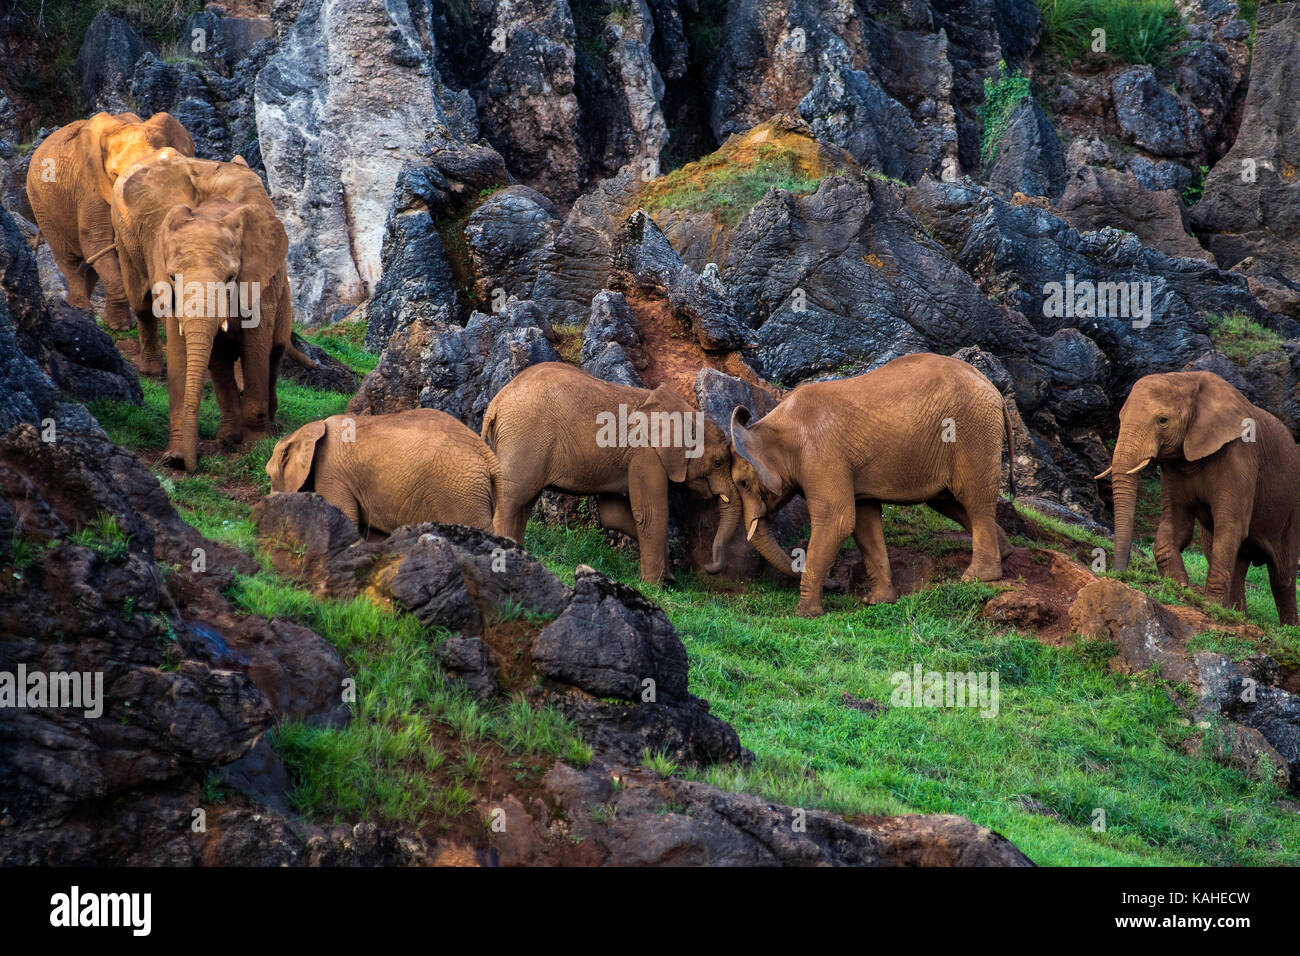 A pair of African Elephants head to head in Cabarceno Natural Park. The park is known for the semi freedom conditions of the animals Stock Photo